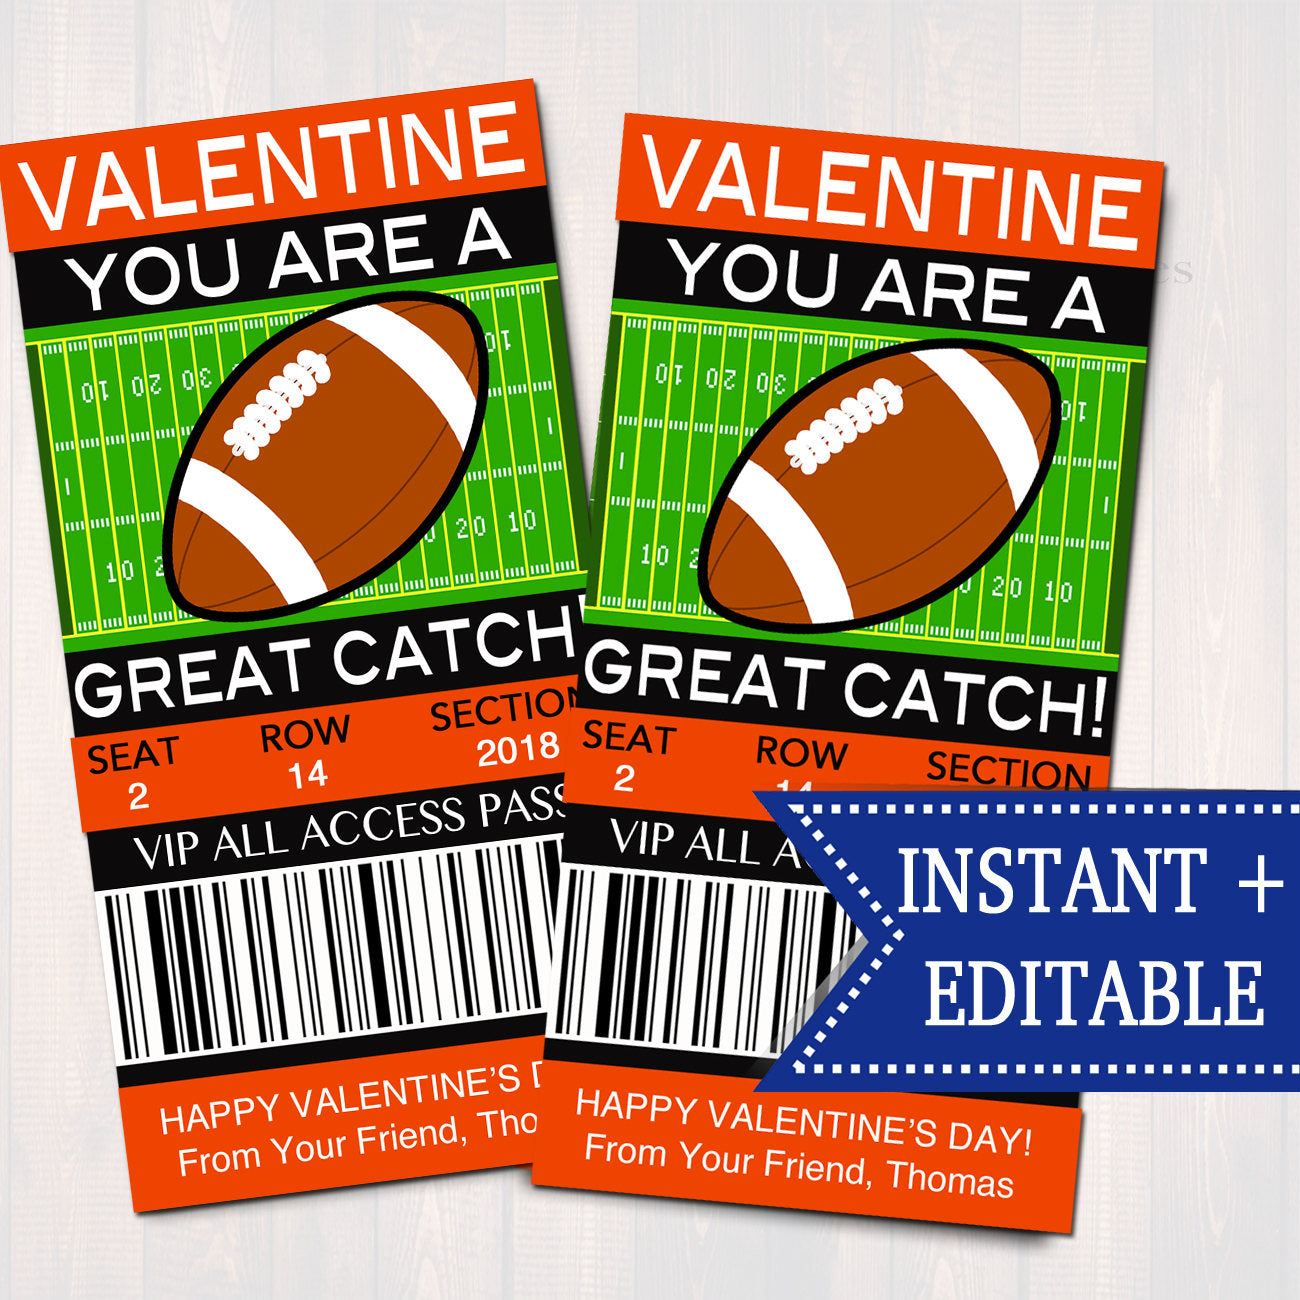 Valentine Day Special 10 Day Passes + Free 2 Day Passes